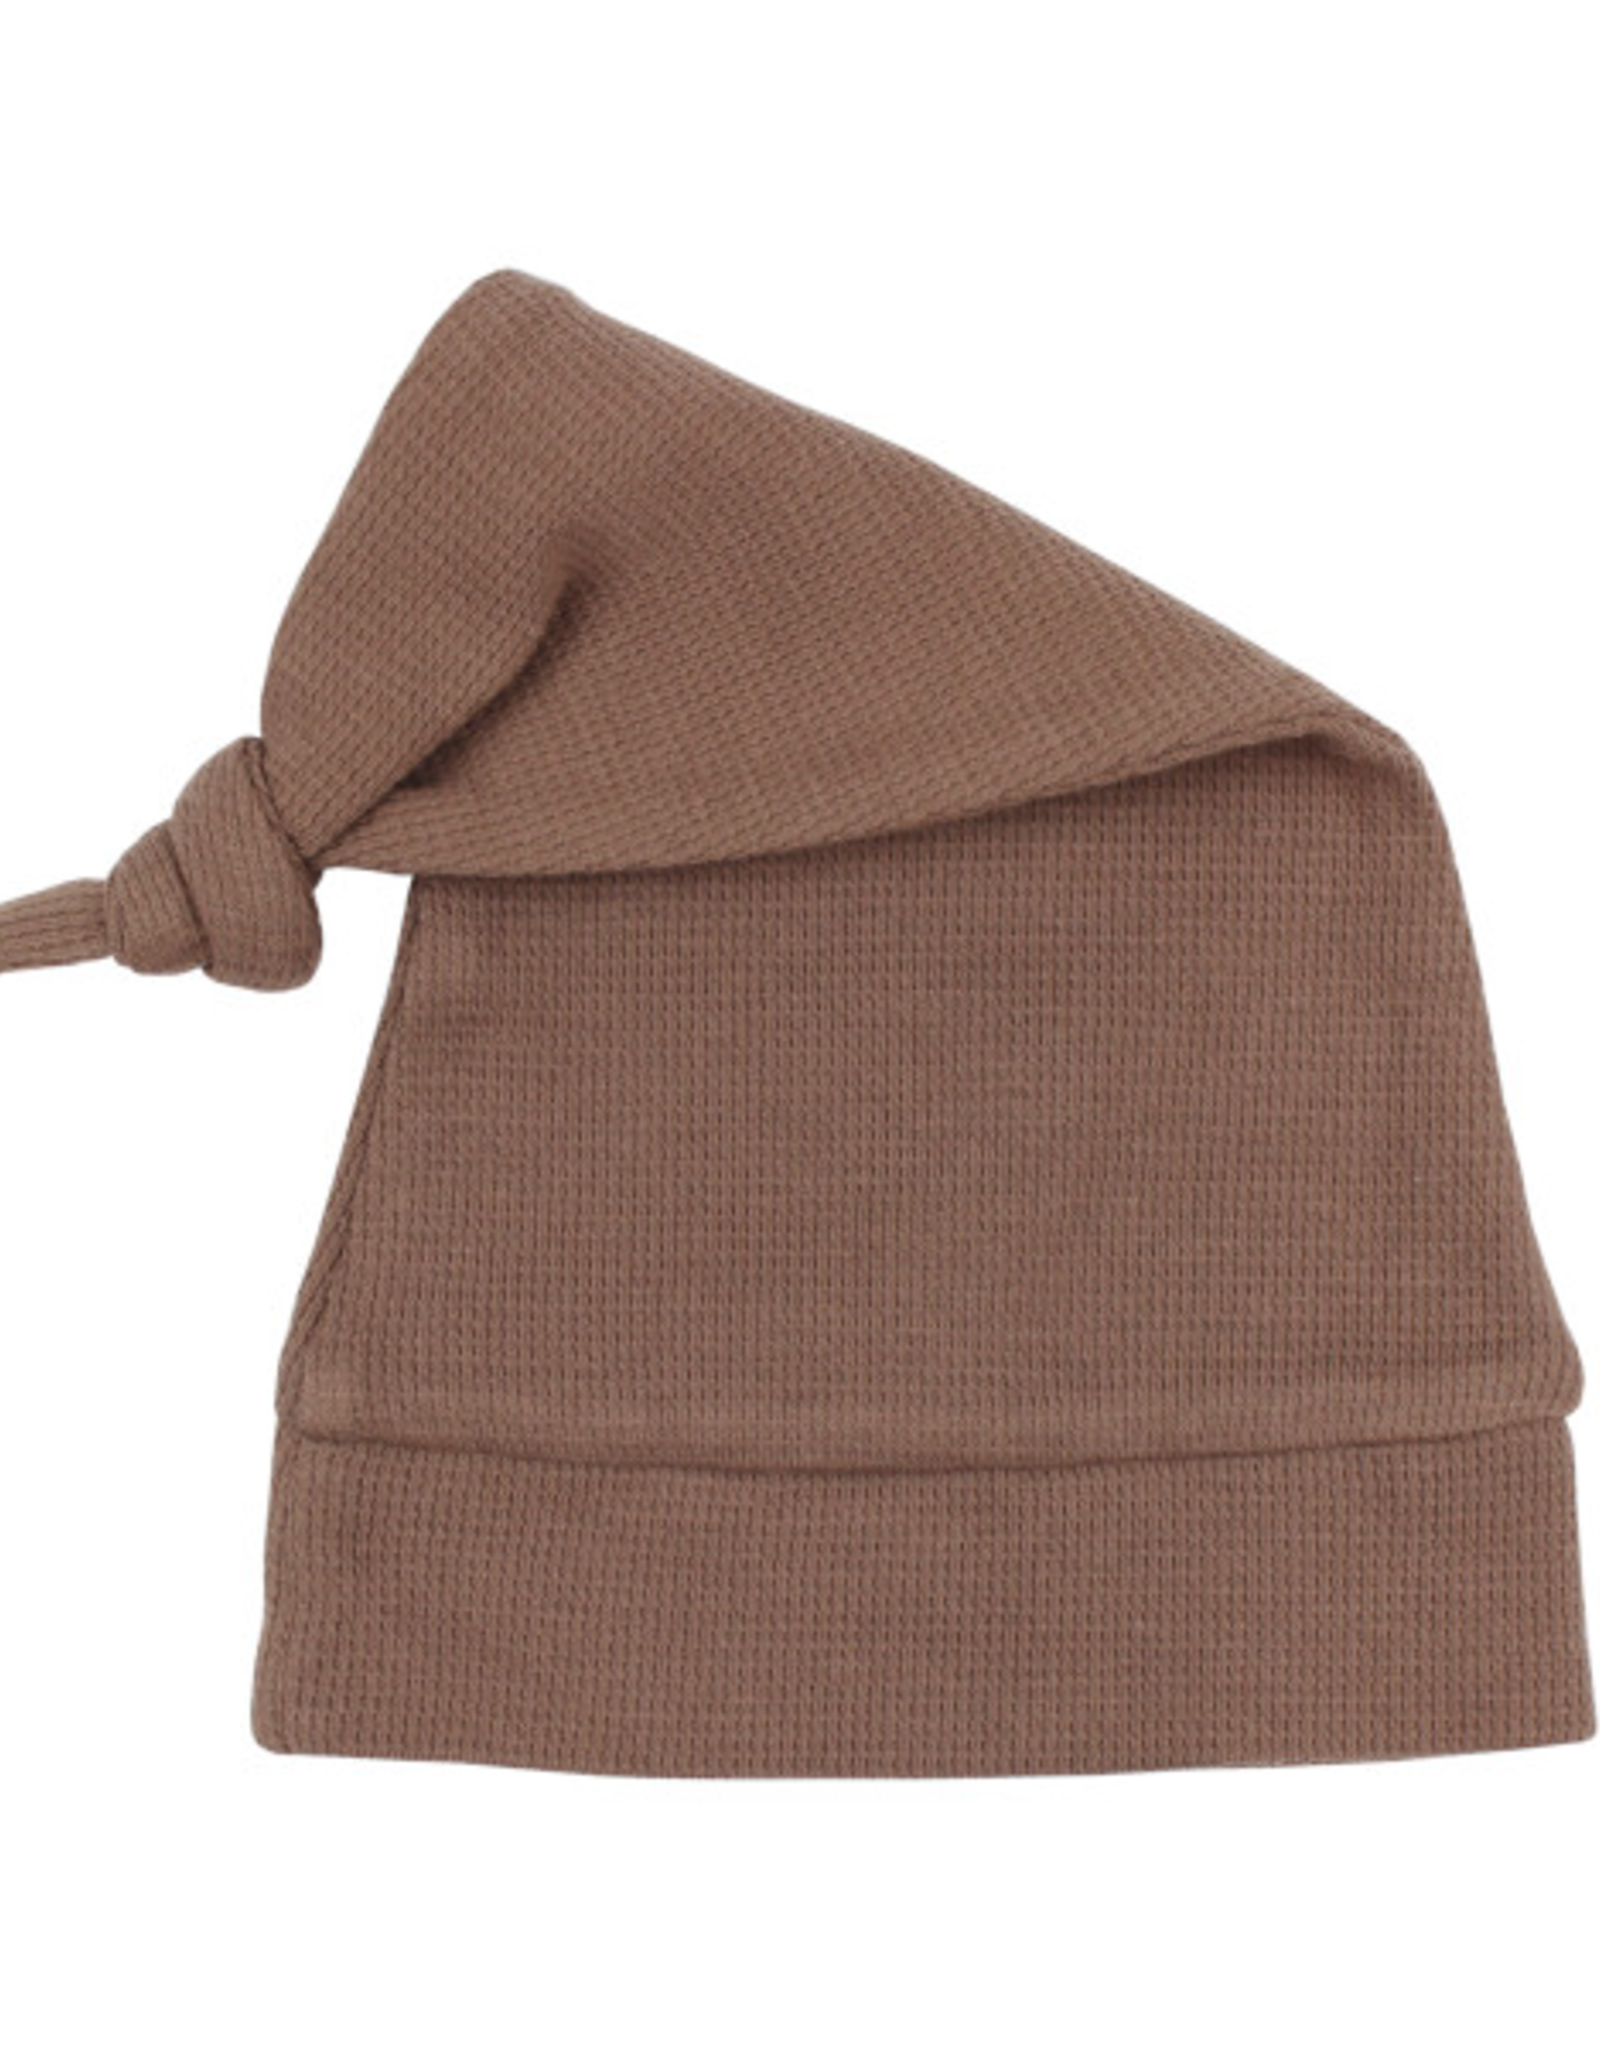 L'oved Baby Thermal Knot Cap Cocoa - 12-24m